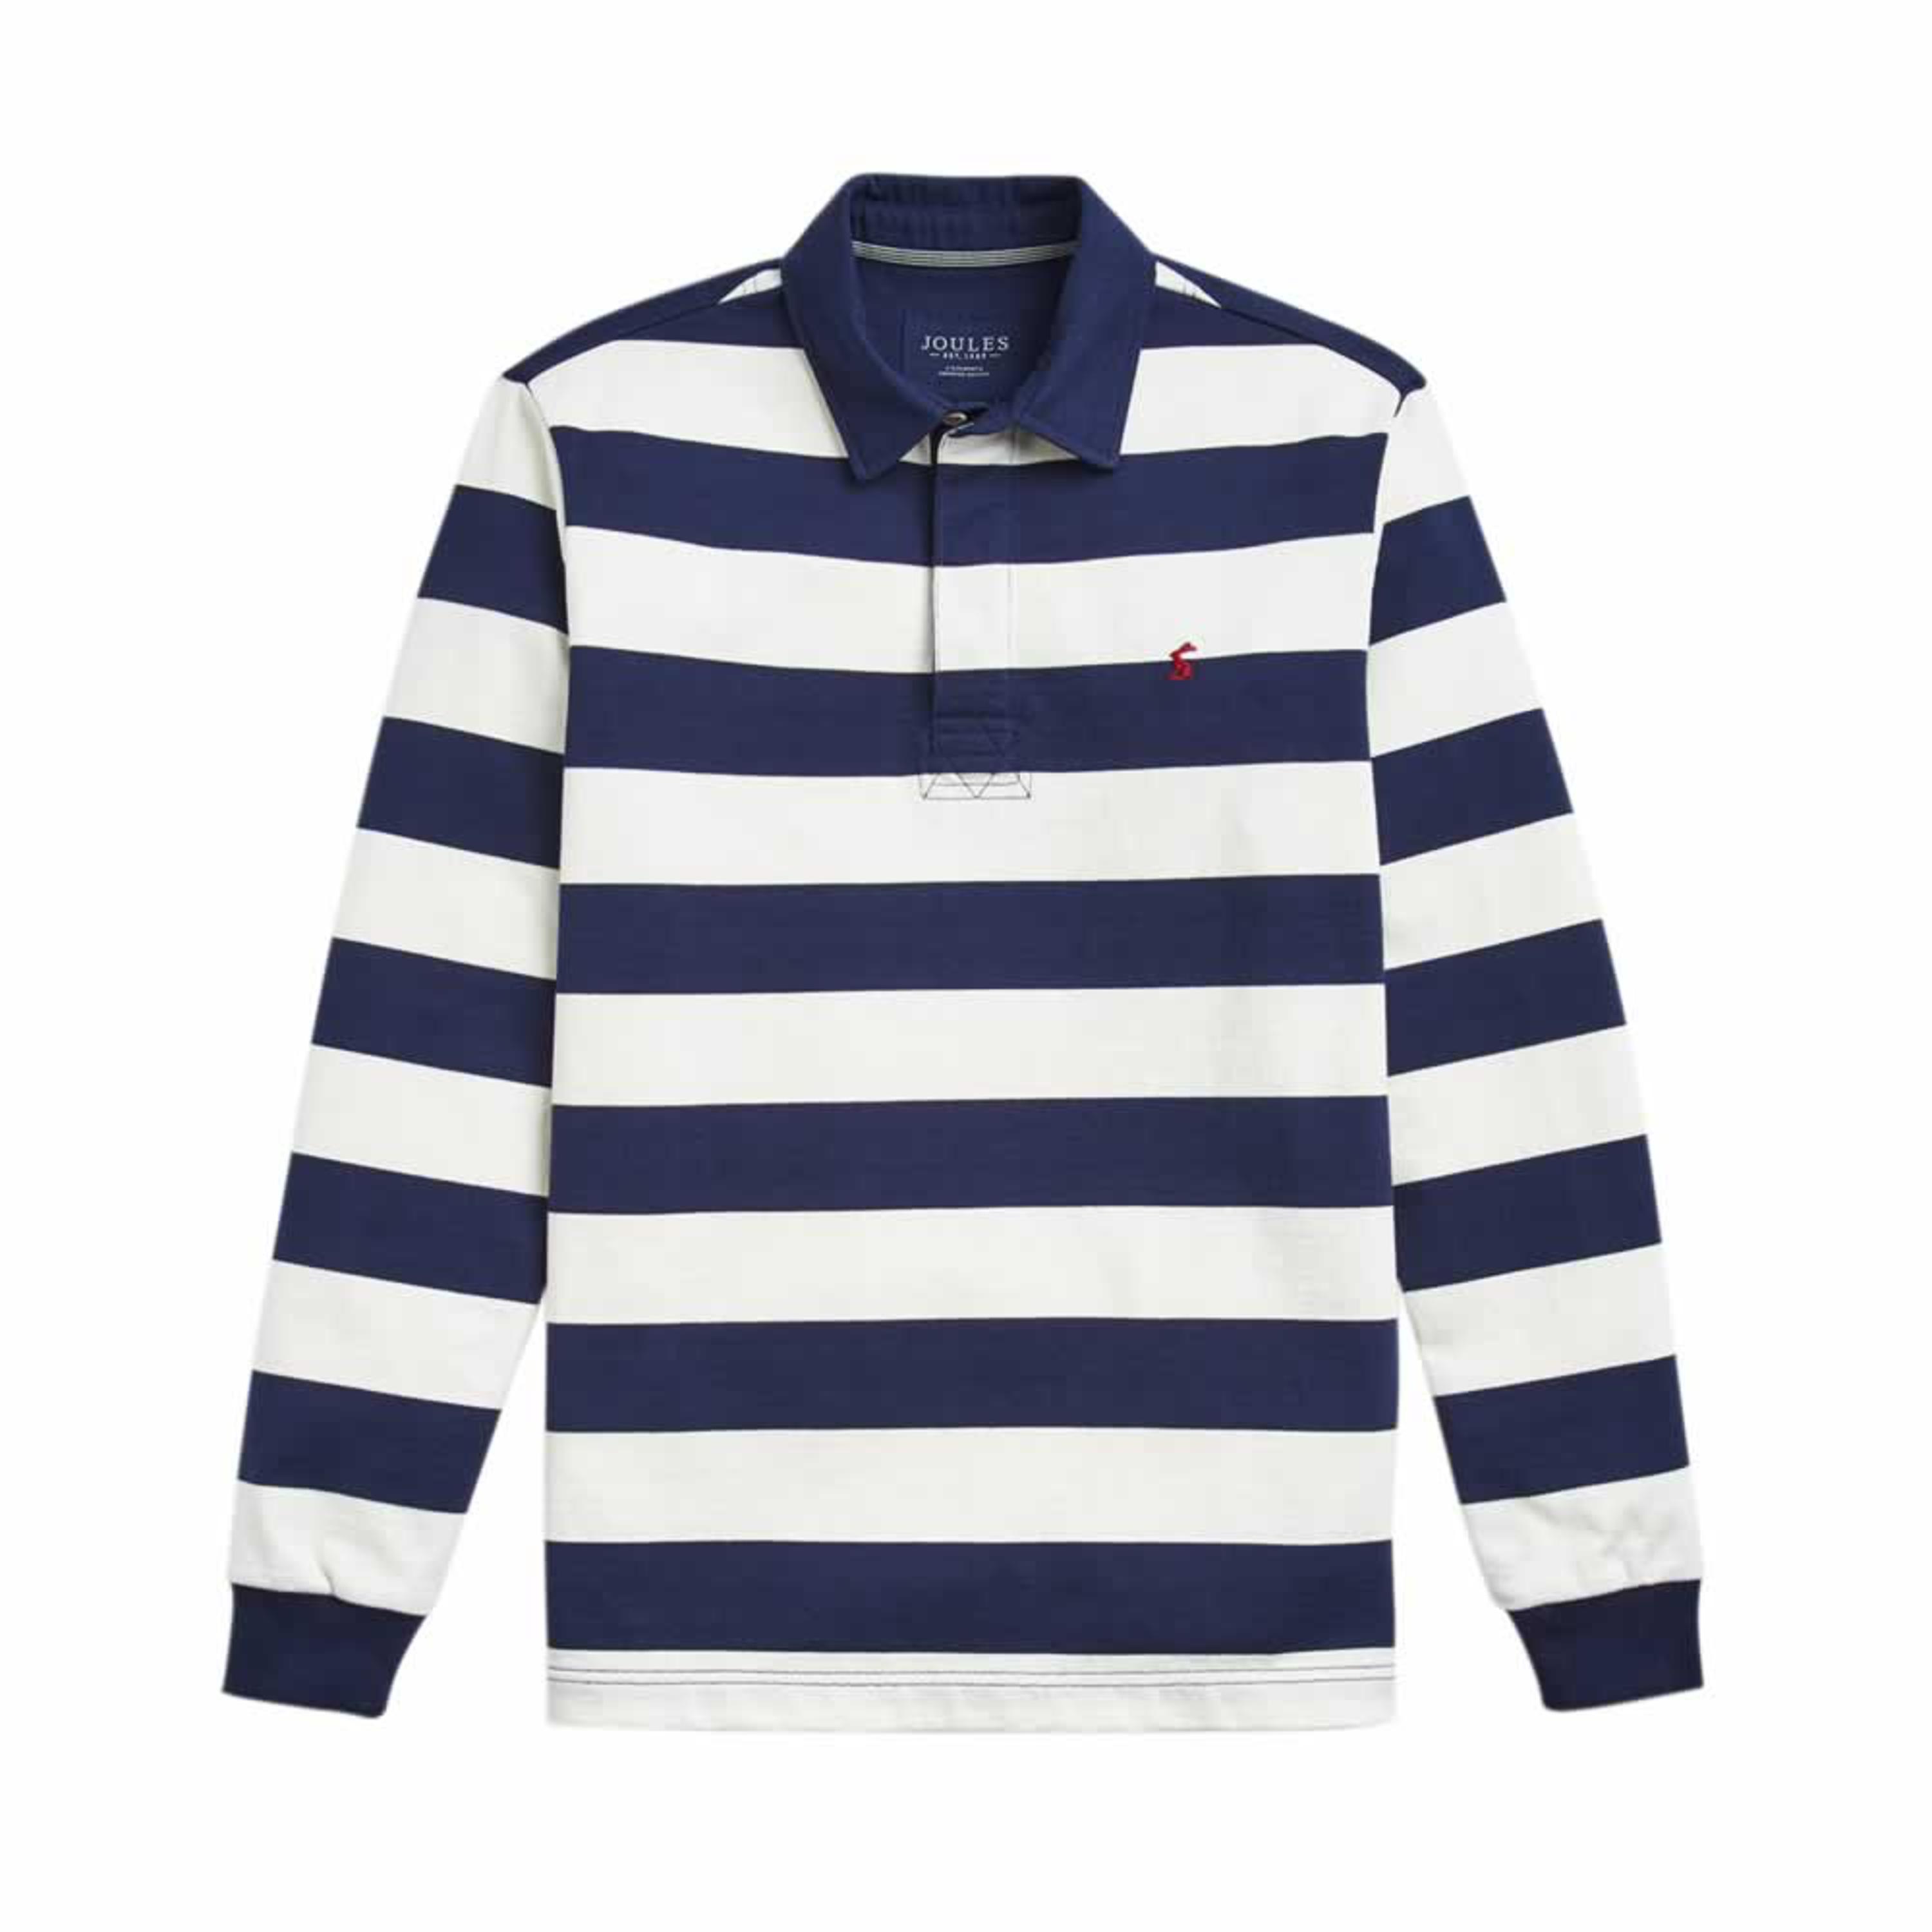 Joules Cotton Onside Long Sleeve Stripe Rugby Shirt in Navy/White (Blue ...